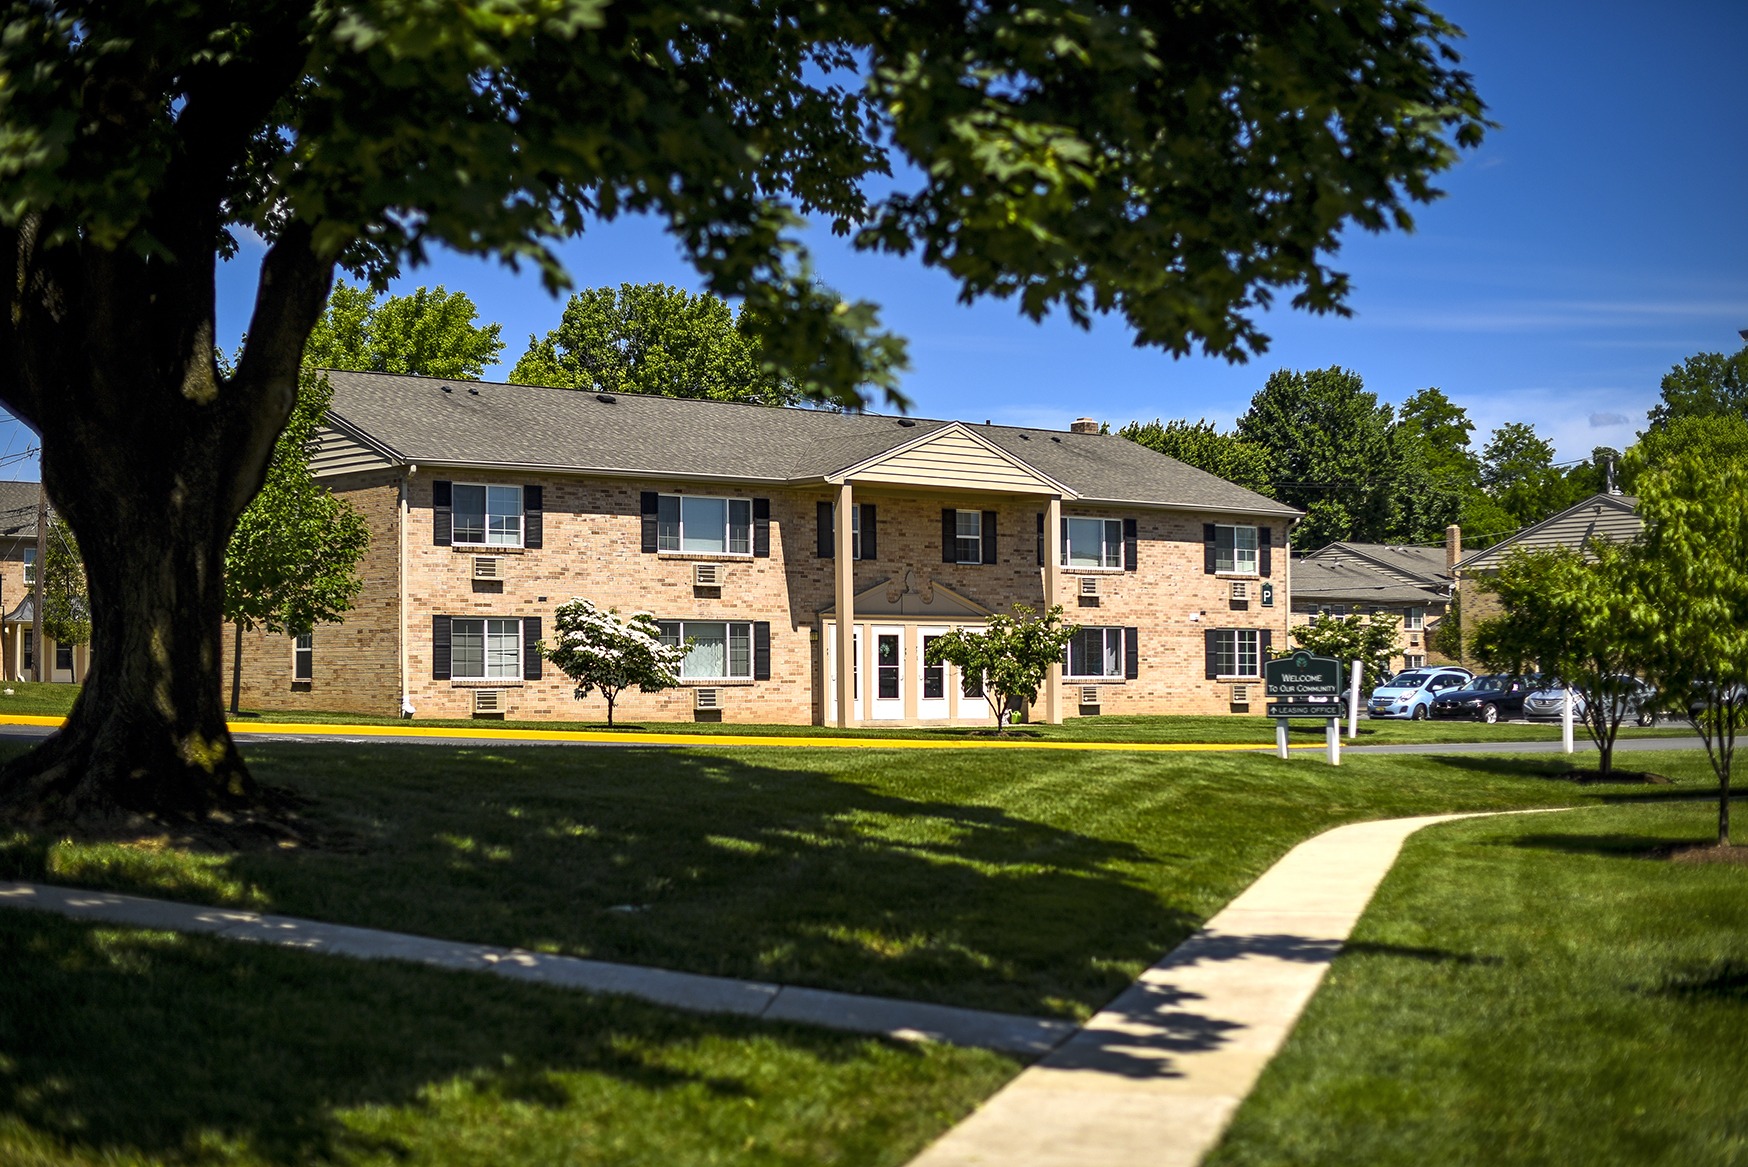 Apartment building of Woodland Plaza with a large tree and lawn in front of it